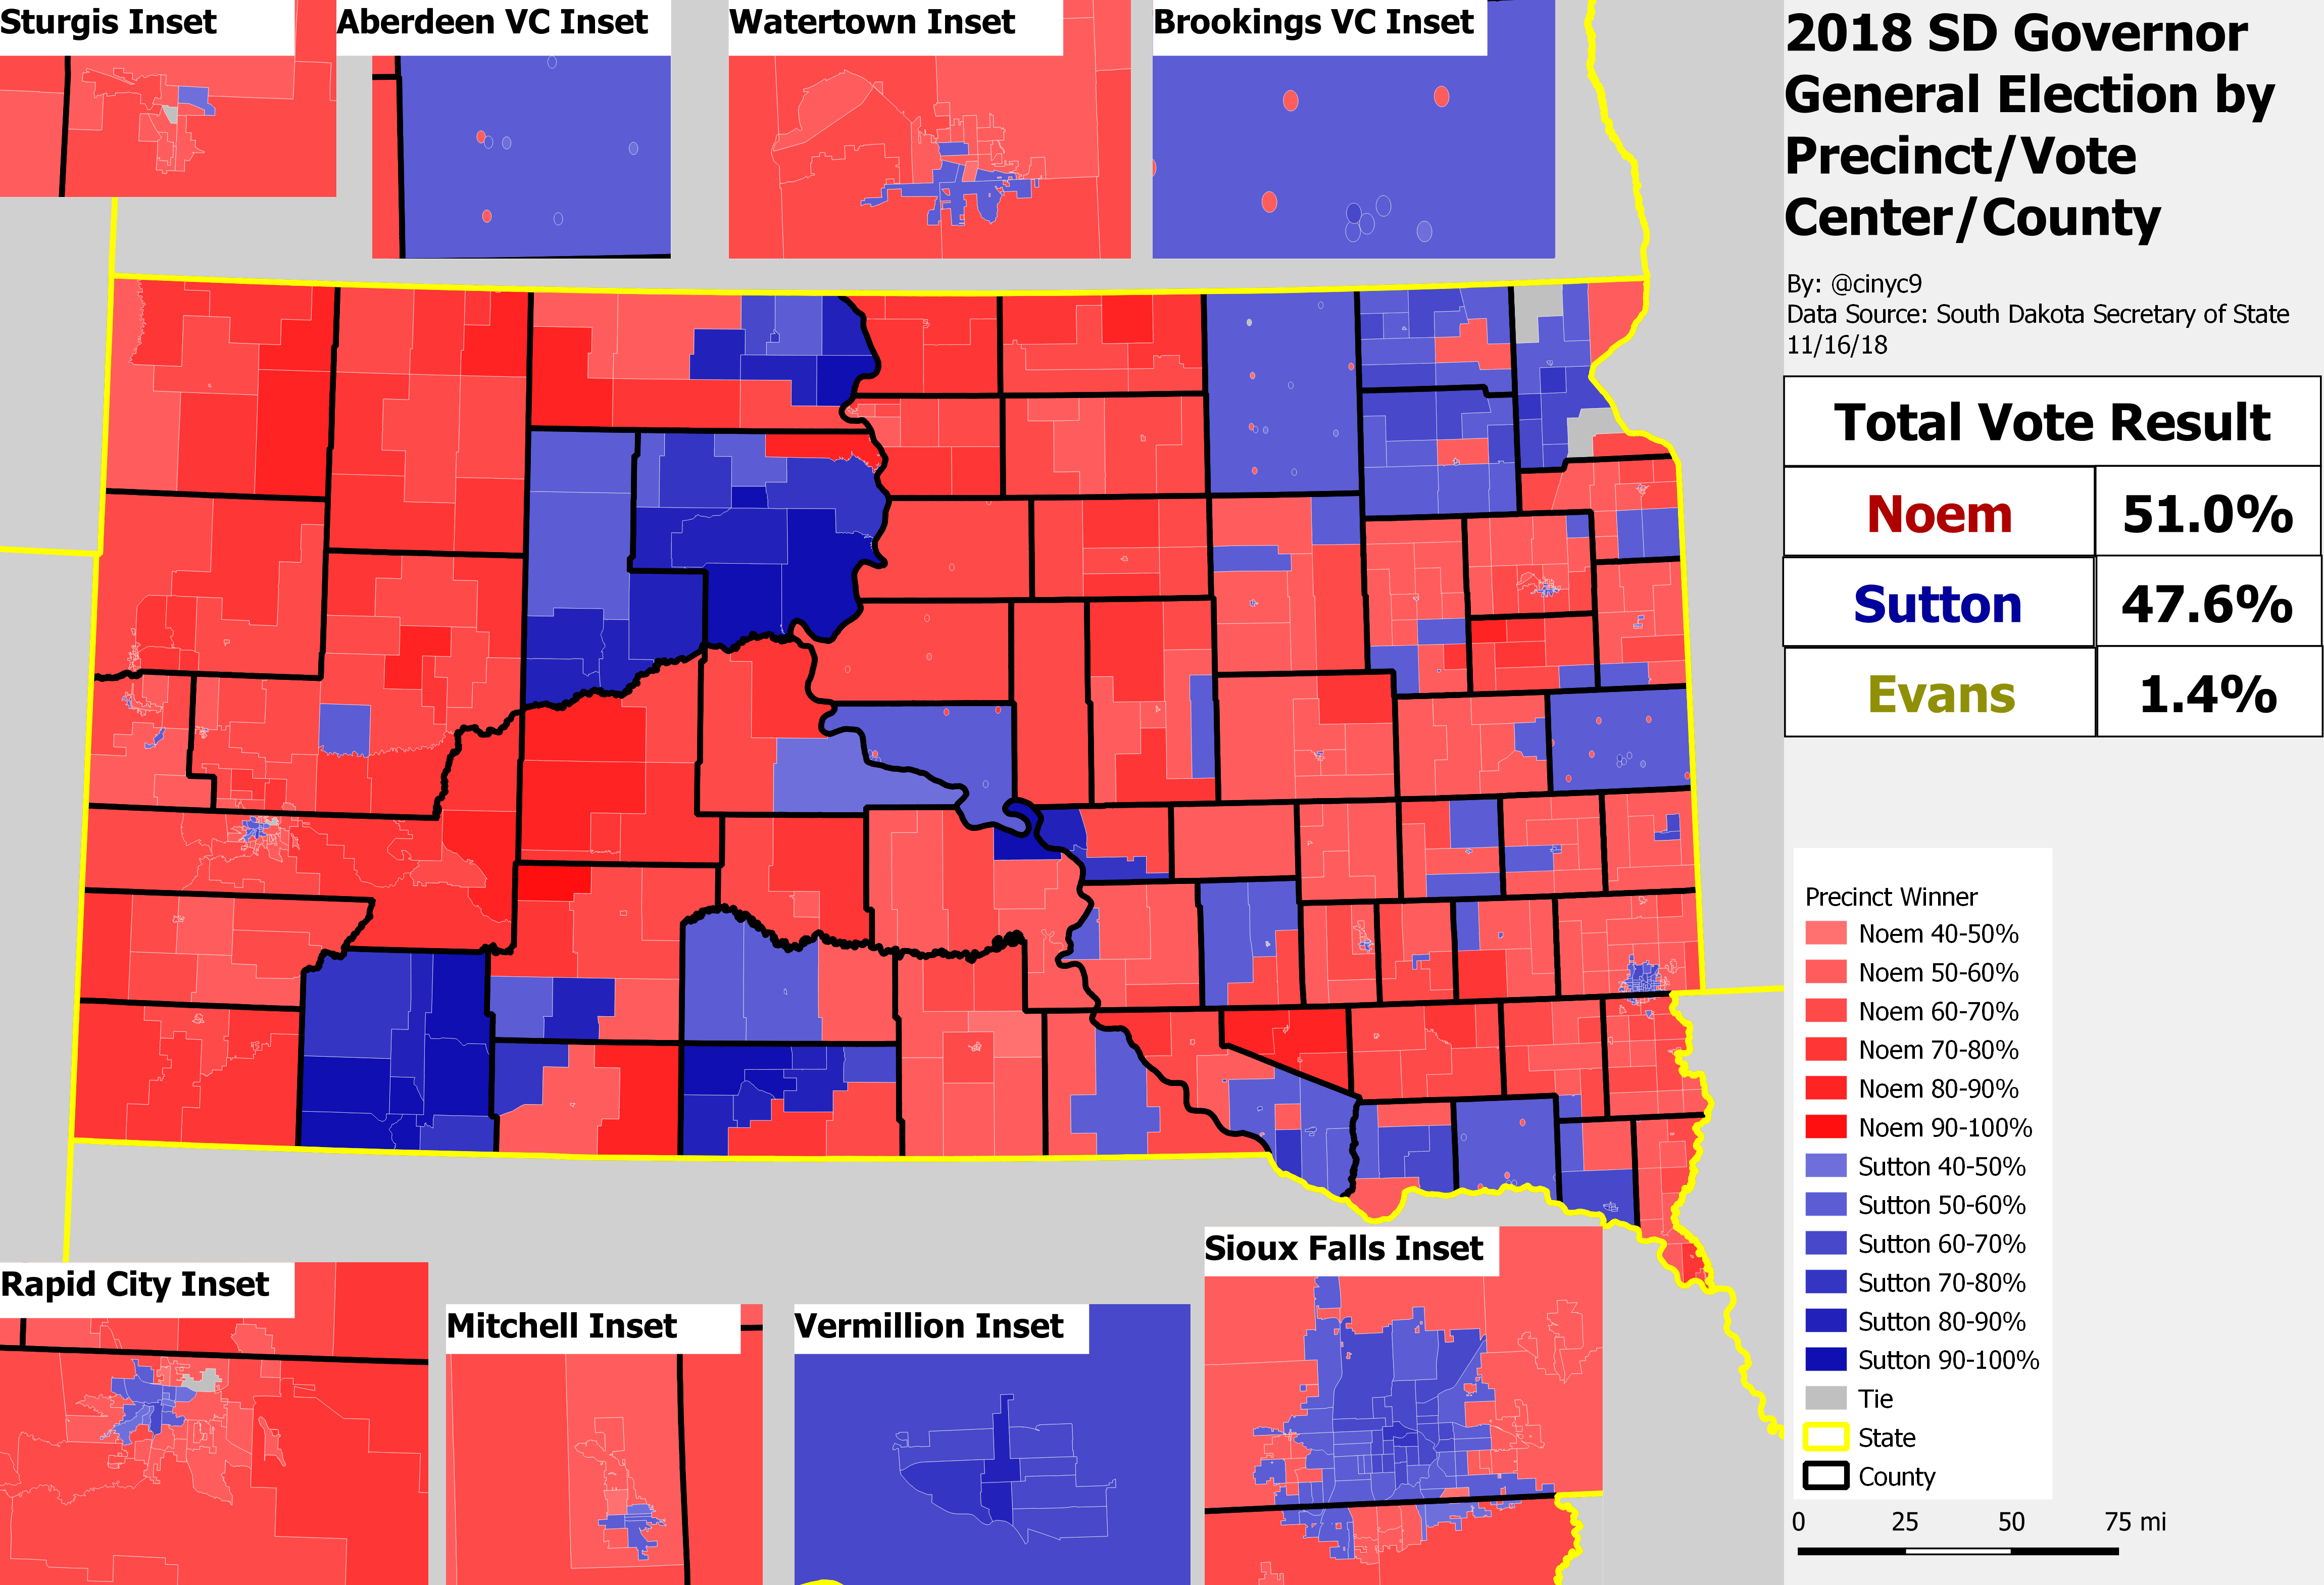 Interactive map of 2014-18 South Dakota historic election results by precinct